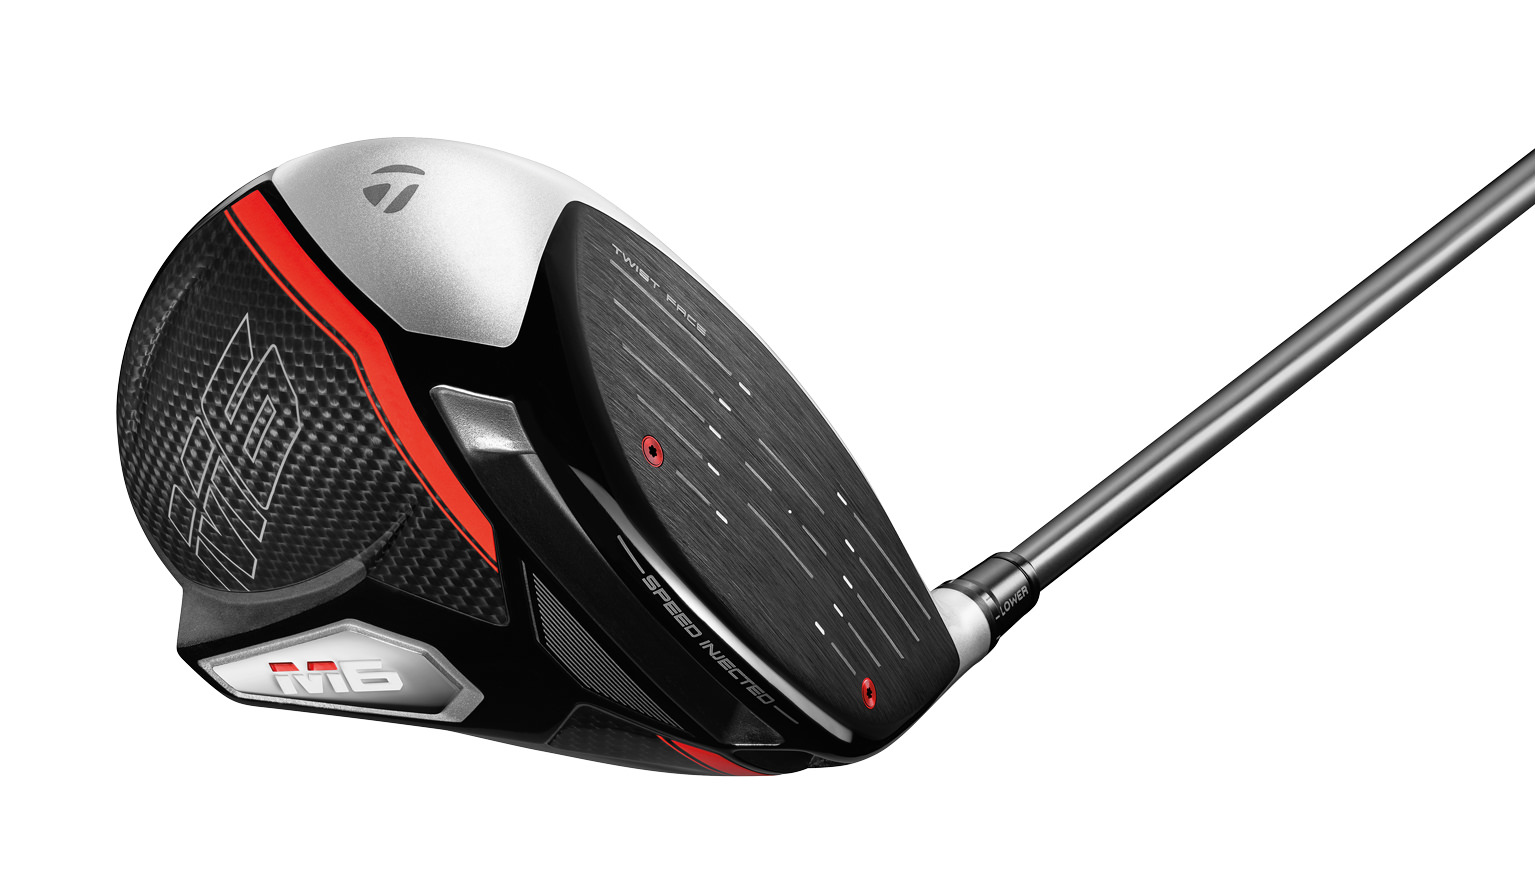 TaylorMade M5 driver vs. M6 driver